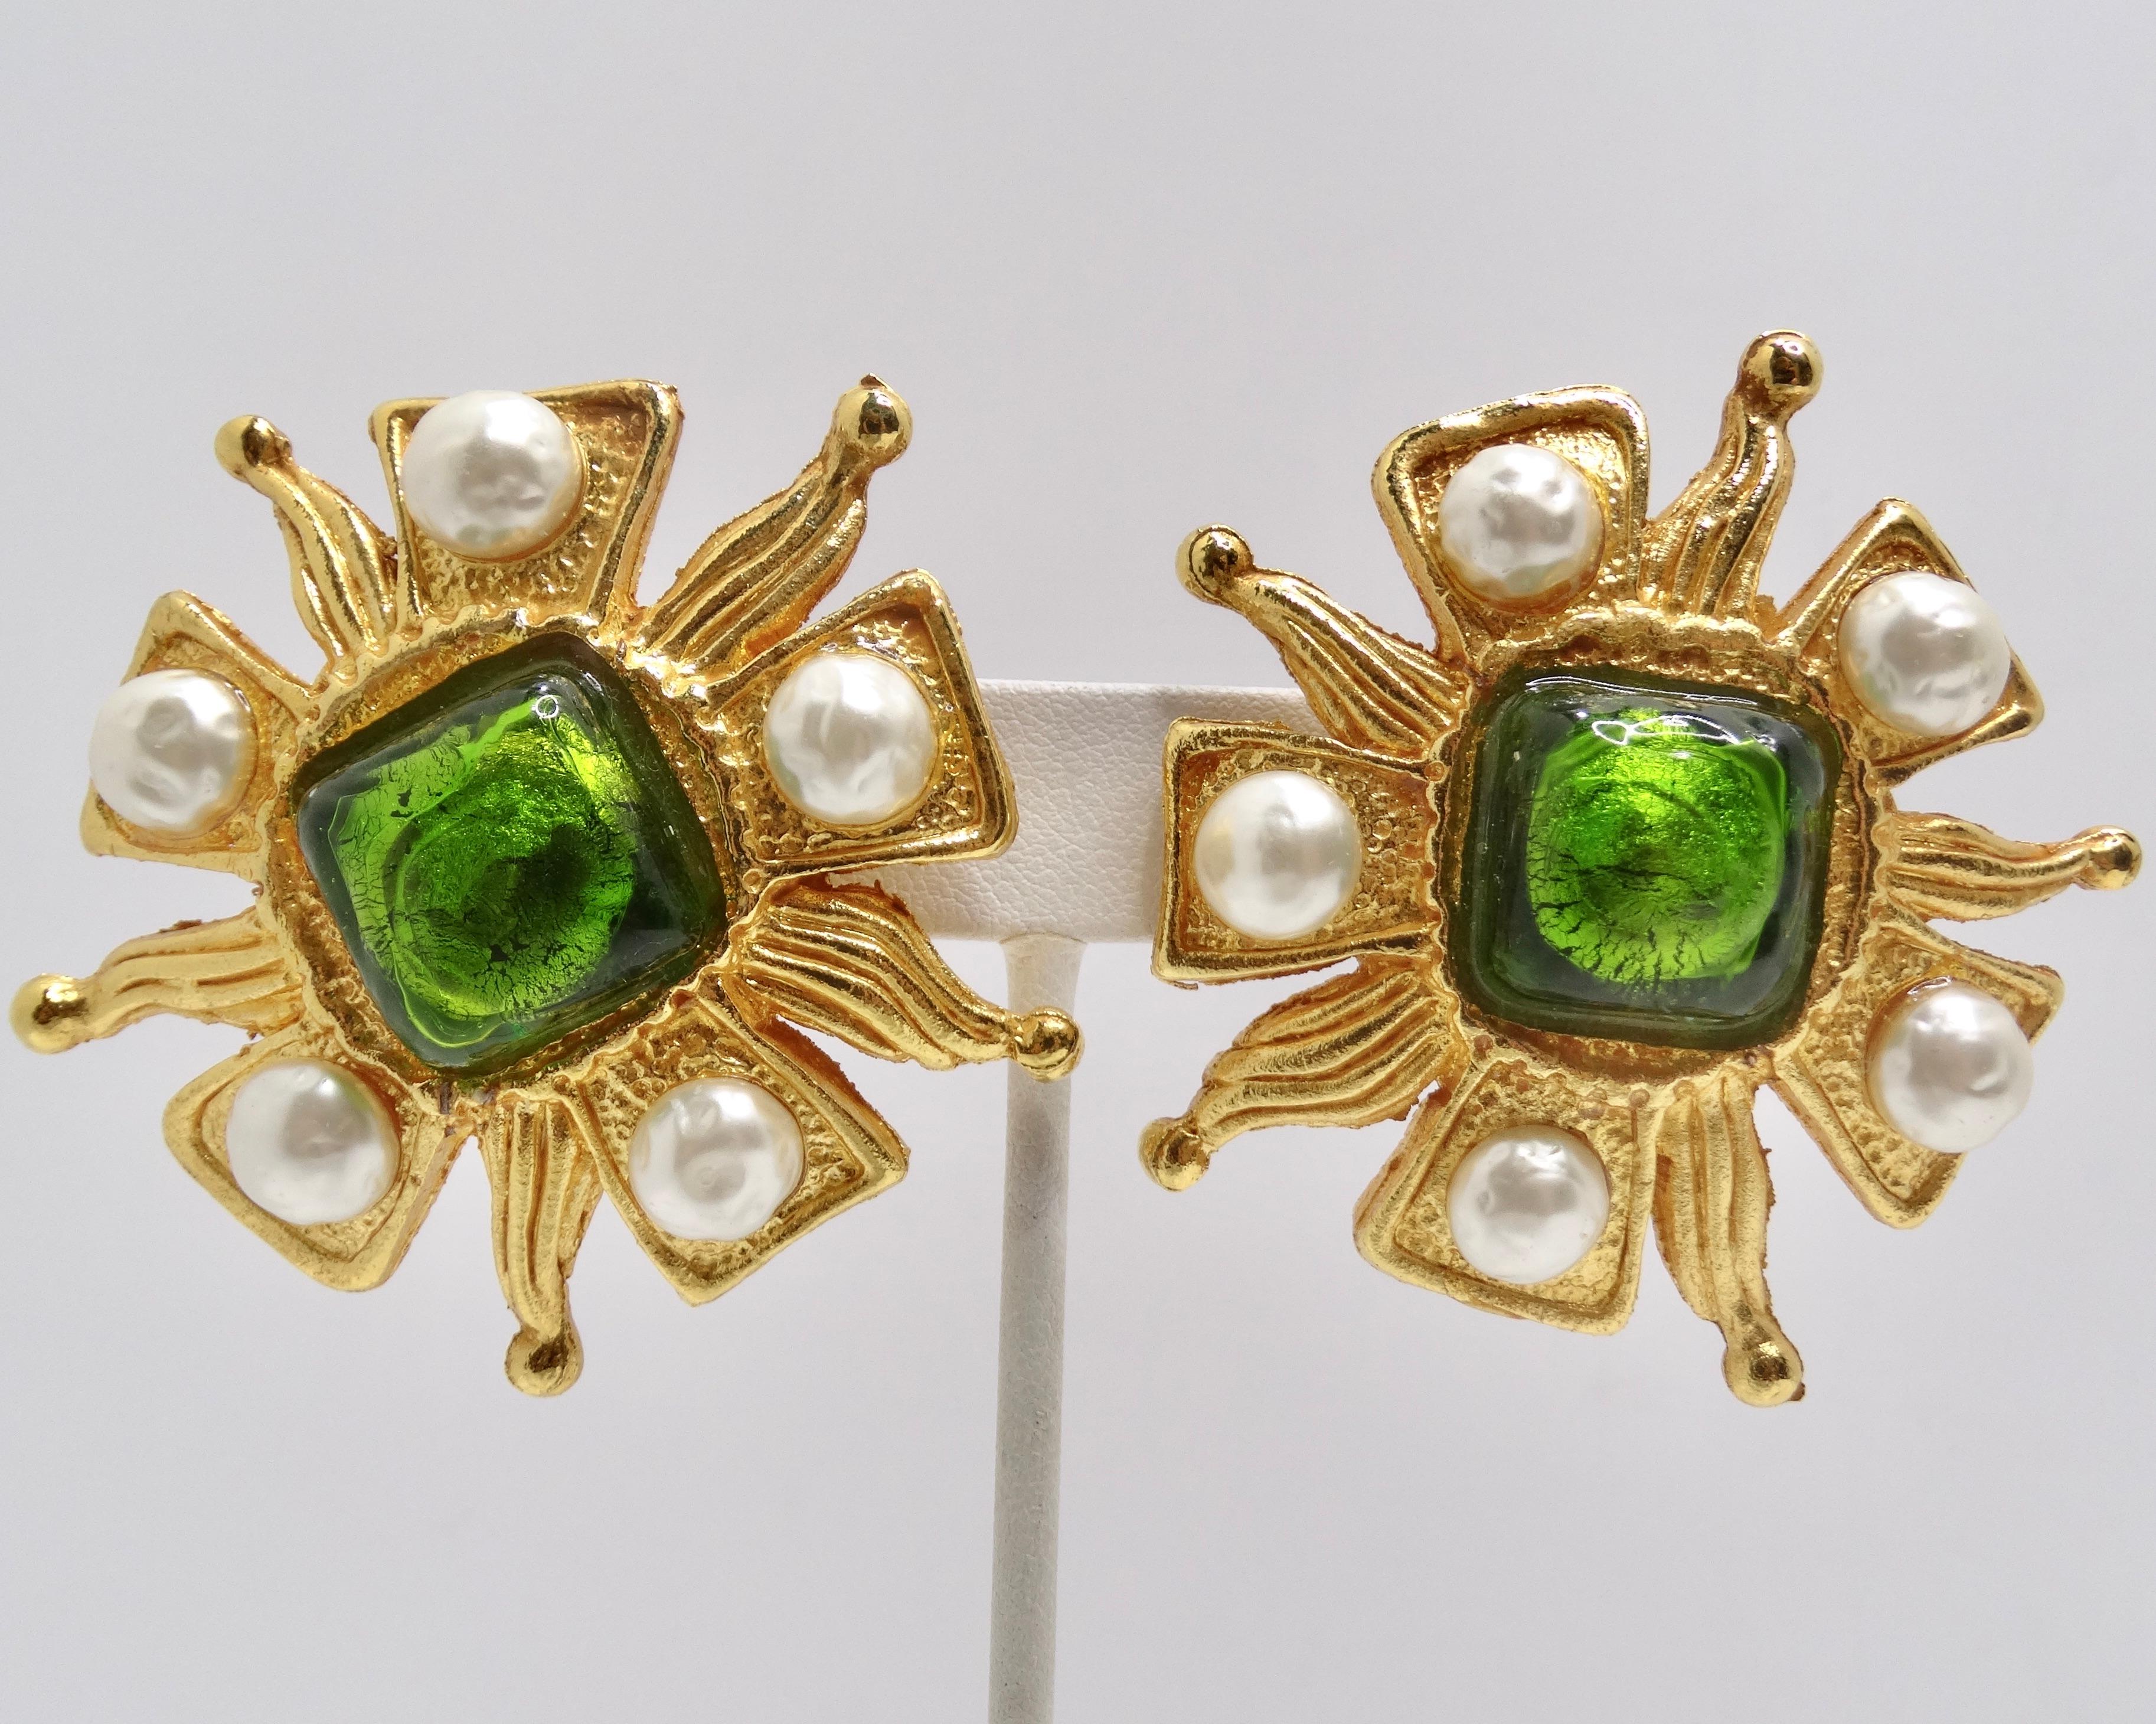 Get your hands on a pair of exquisite statement earrings from the 1980s by Dominique Aurientis Paris. These statement earrings showcase textured shiny yellow gold plating, adding depth and dimension to the design. The textured finish enhances the